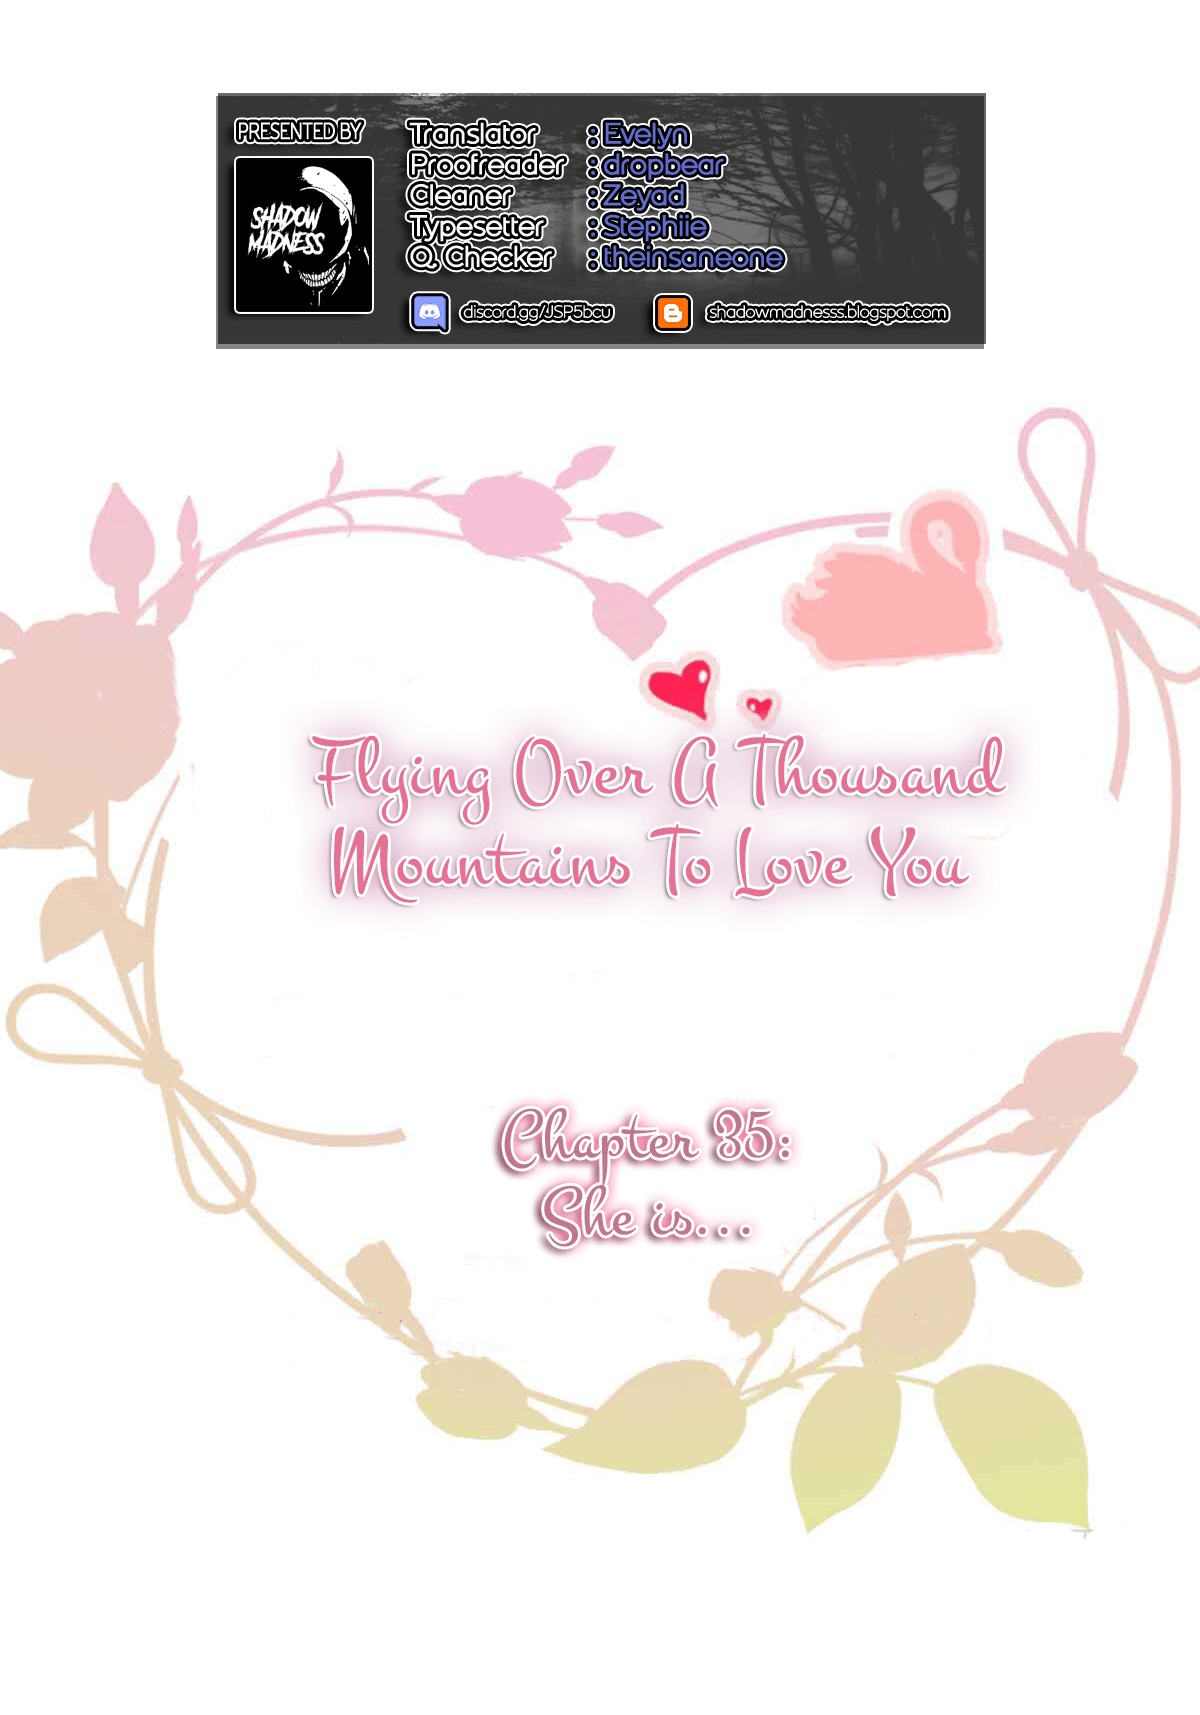 Flying Over a Thousand Mountains to Love You Ch. 35 She is...